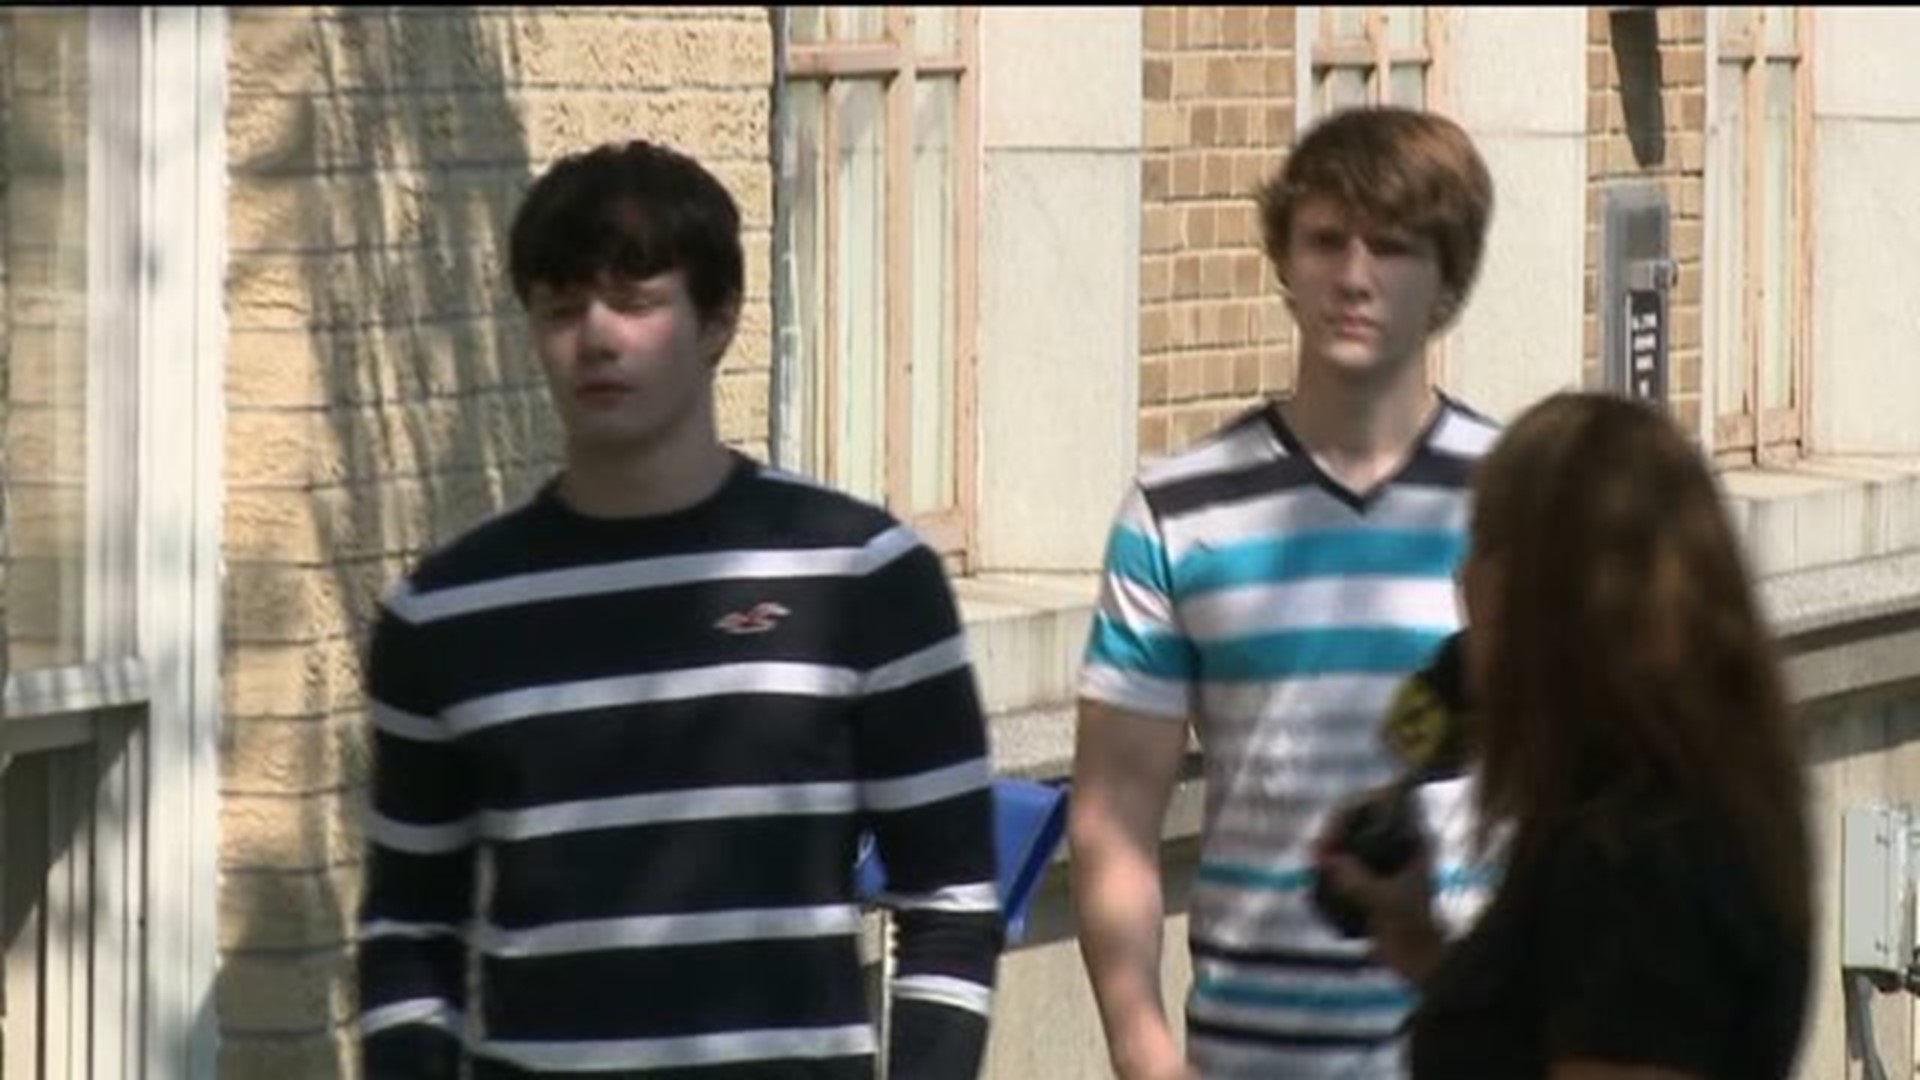 More Charges for Teens Accused in Rock Throwing Case